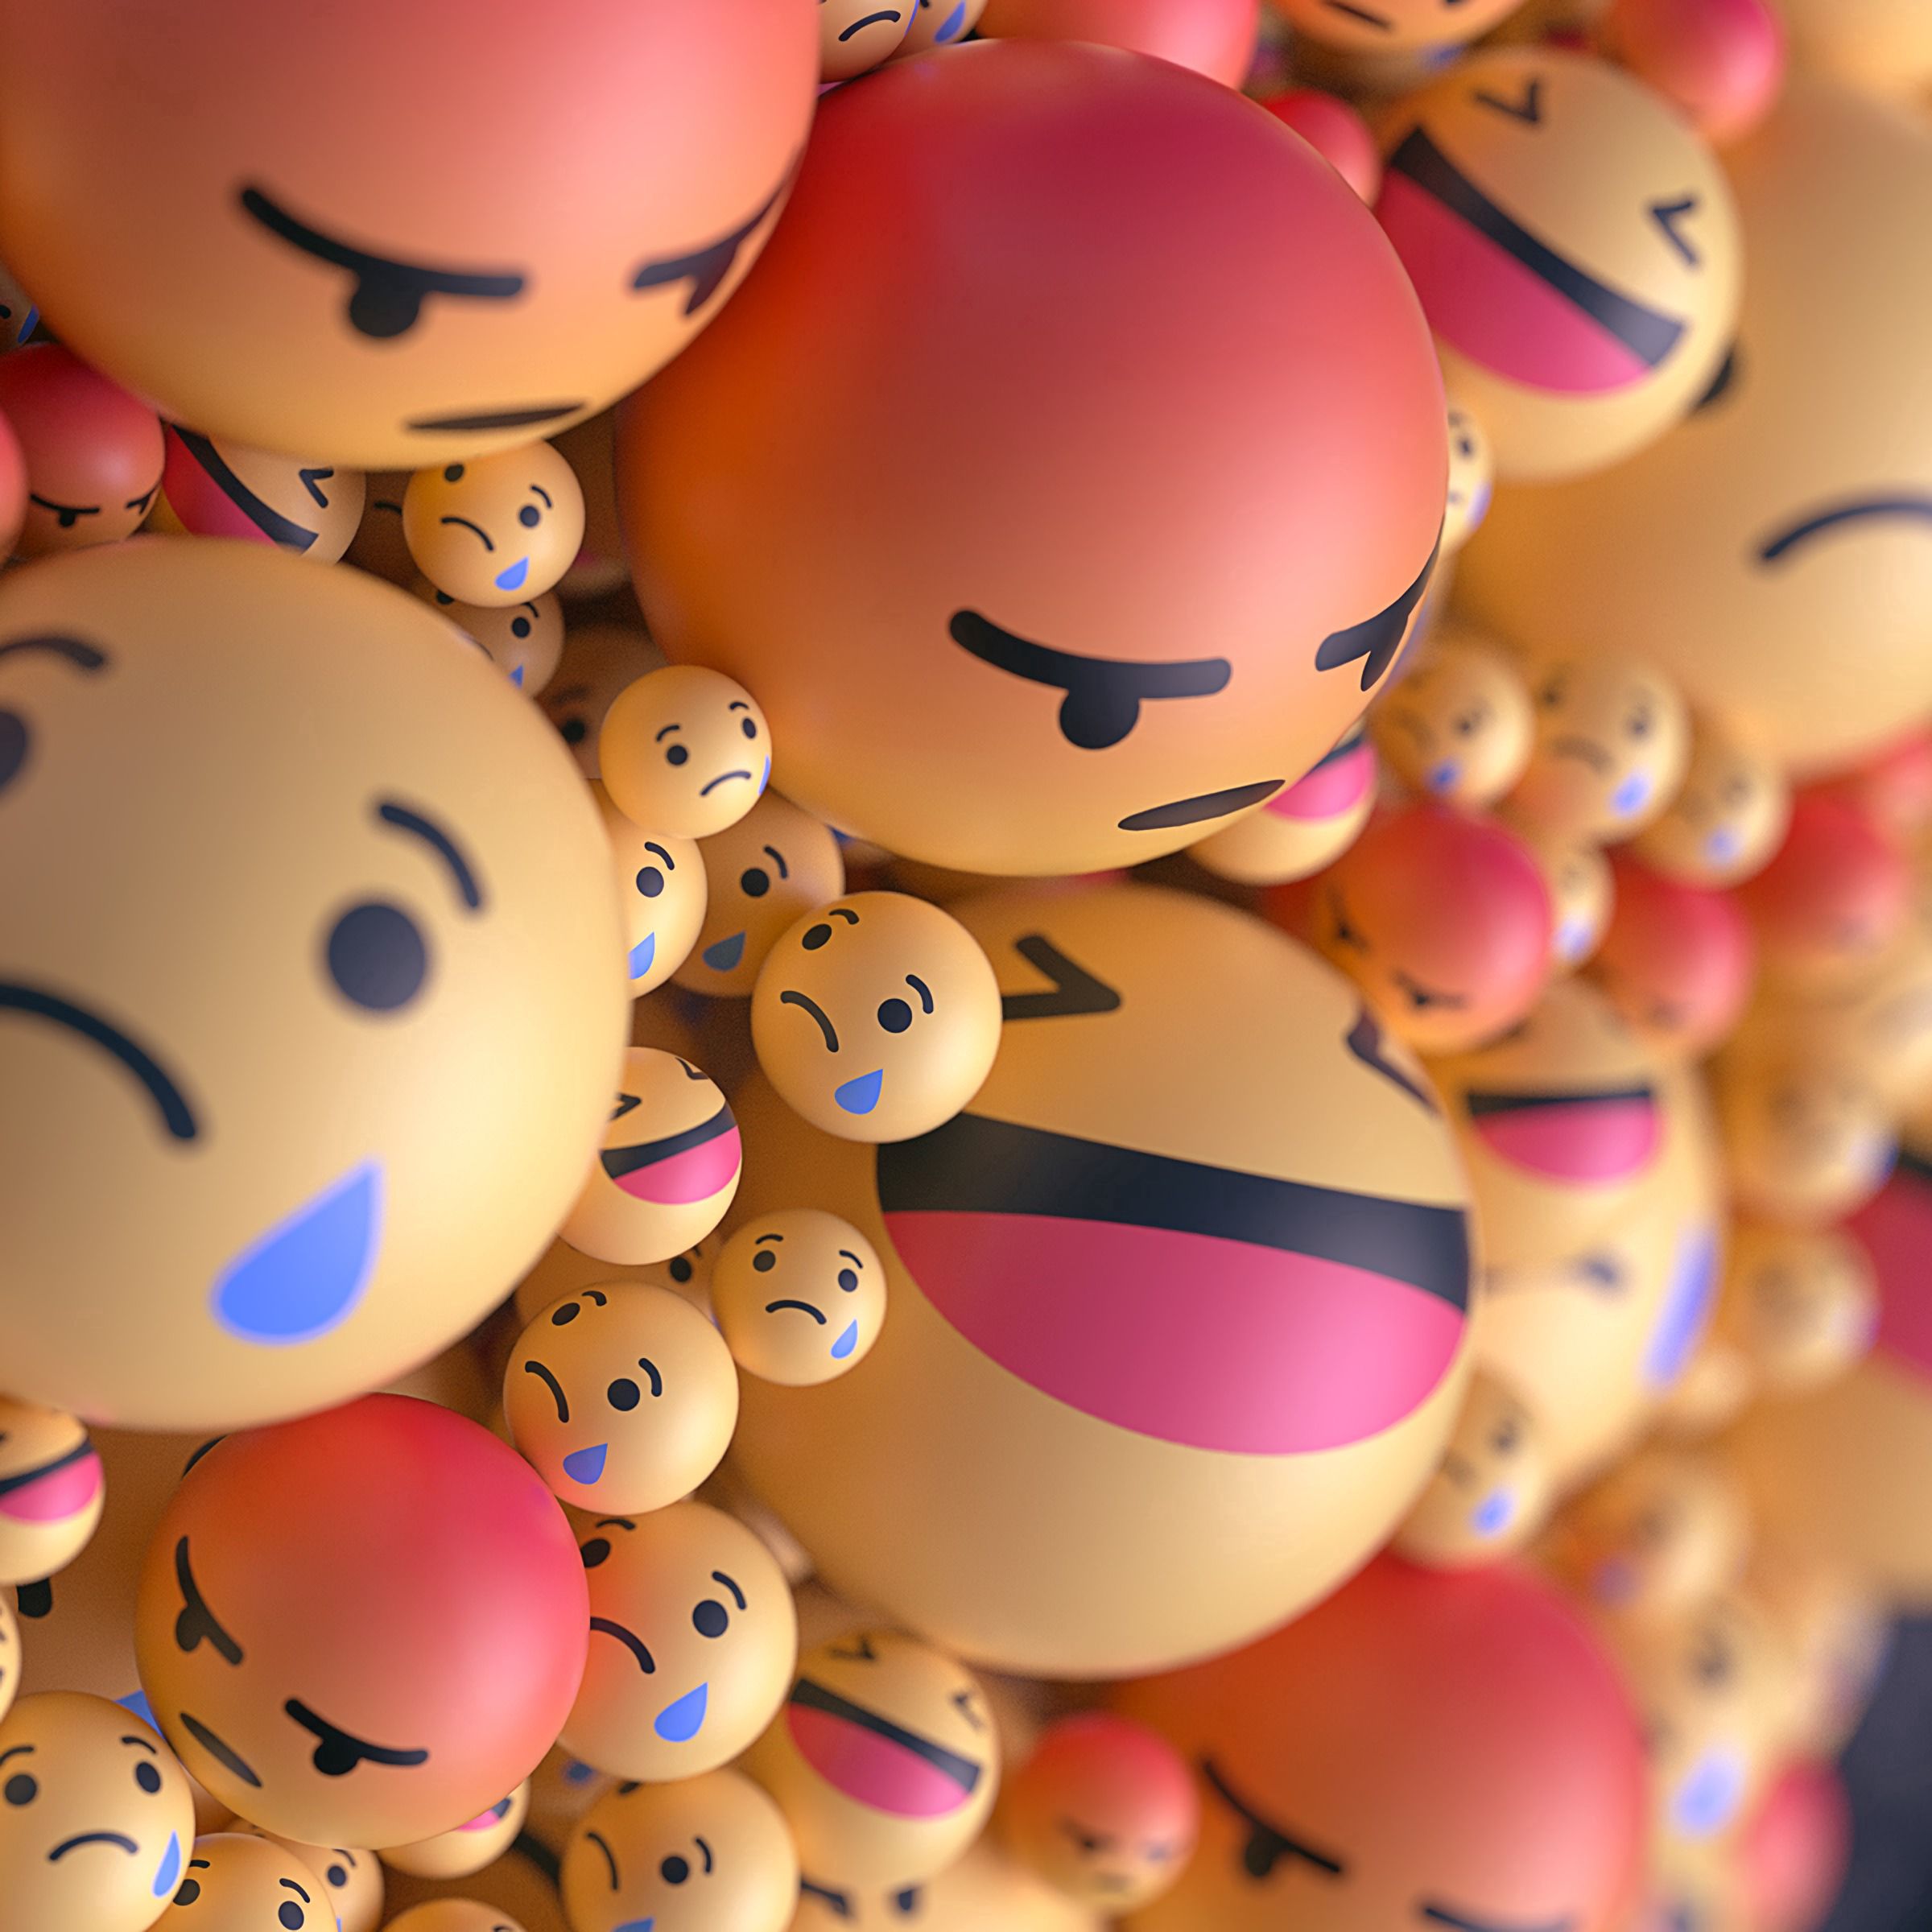 3d, emoticons, taw, smilies, smiles, balloons, smileys, emotions phone wallpaper